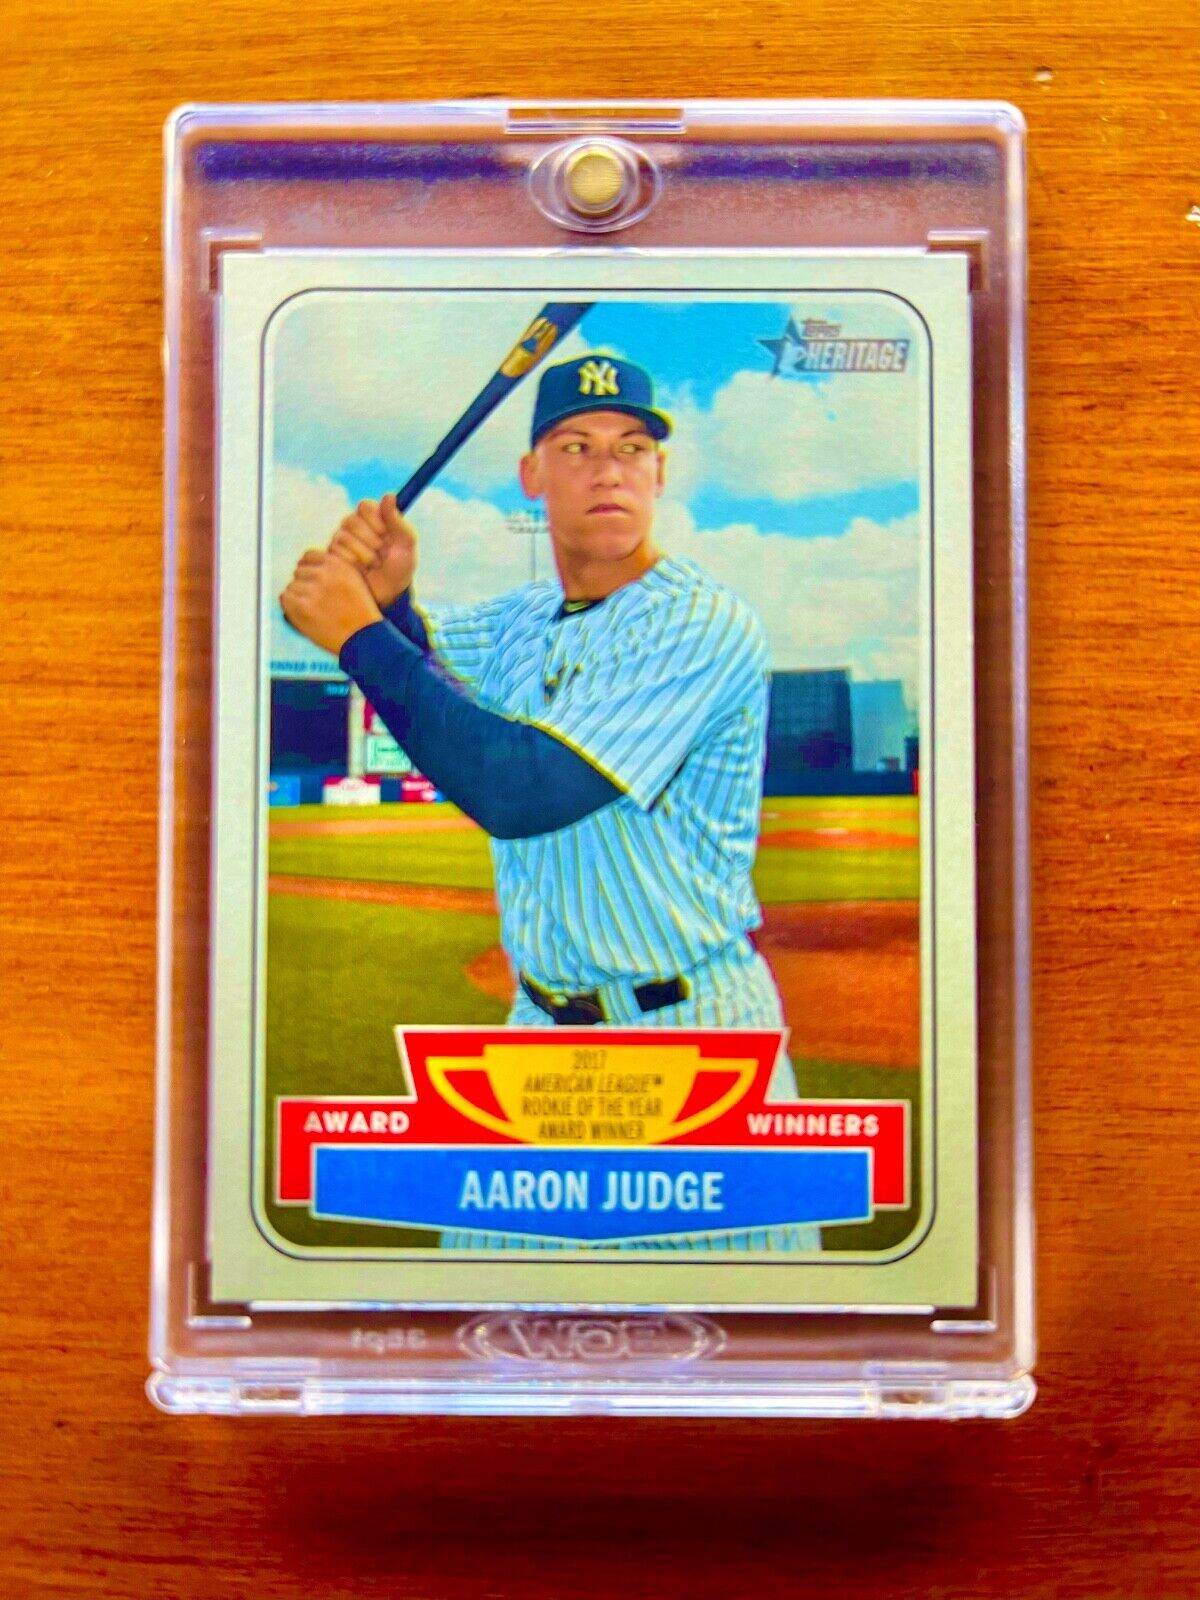 Aaron Judge RARE ROOKIE RC HERITAGE INVESTMENT CARD SSP TOPPS YANKEES MVP MINT